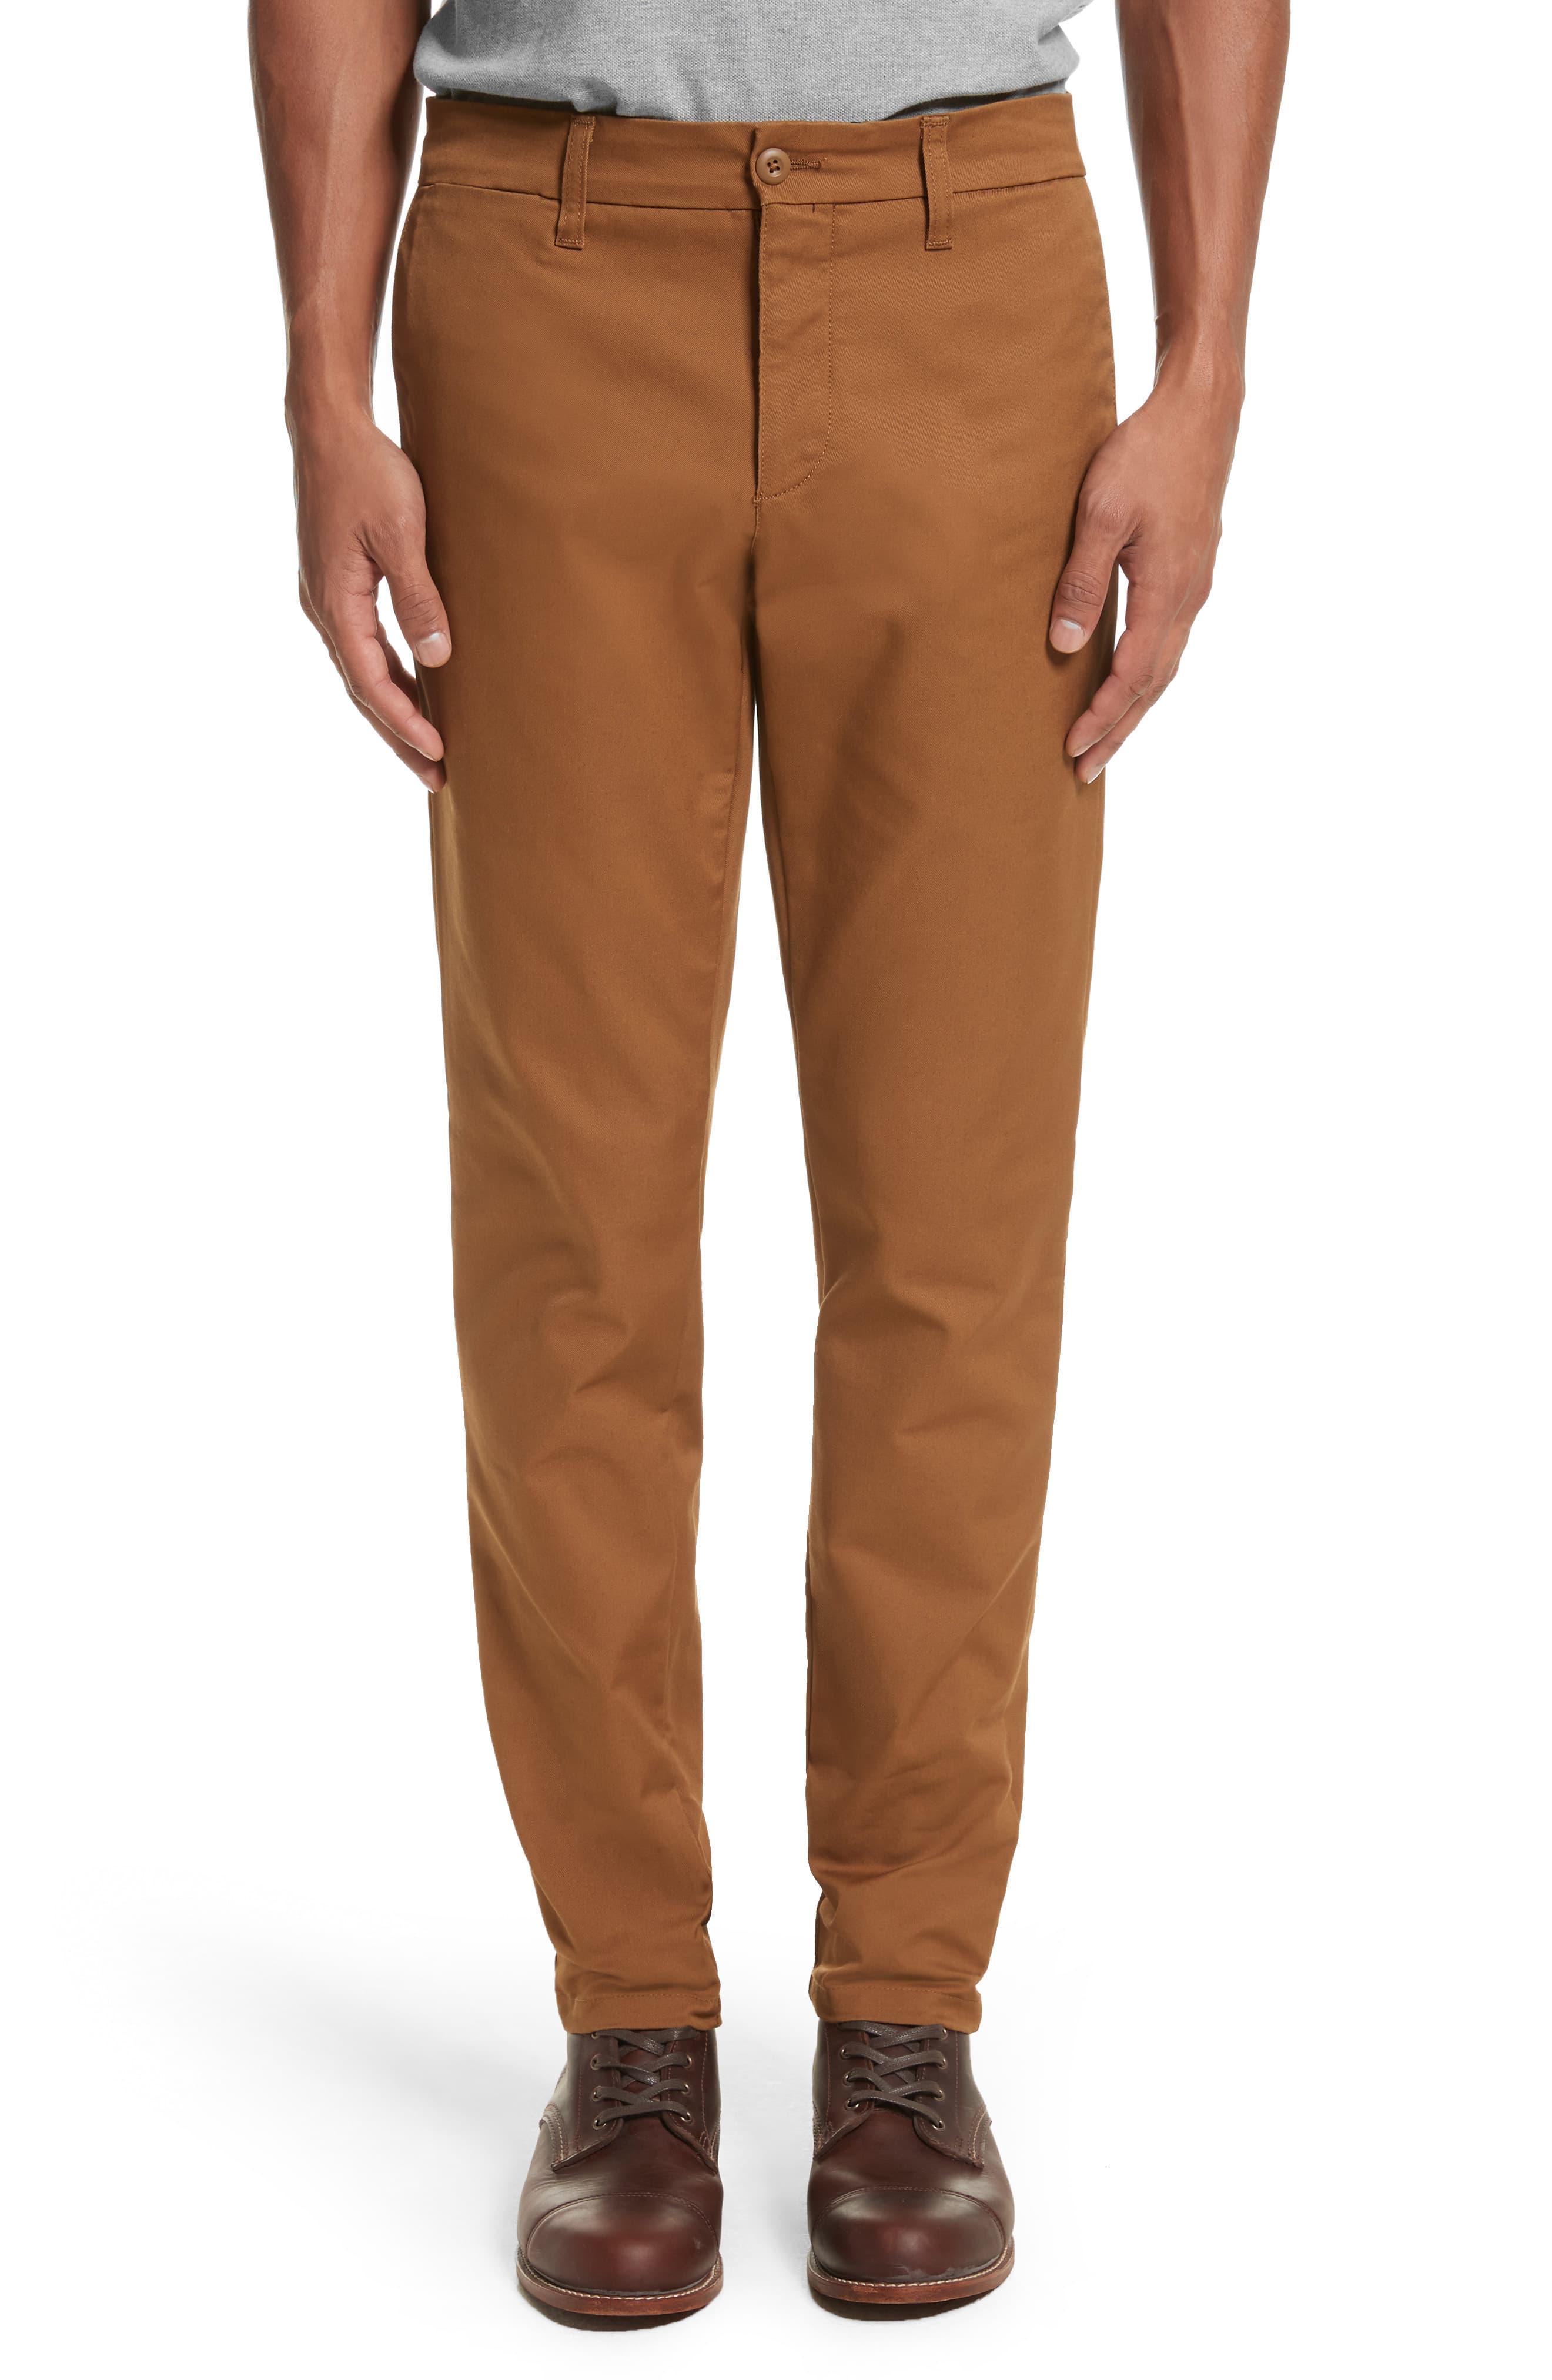 Carhartt WIP Sid Chino Pants in Brown for Men - Save 5% - Lyst